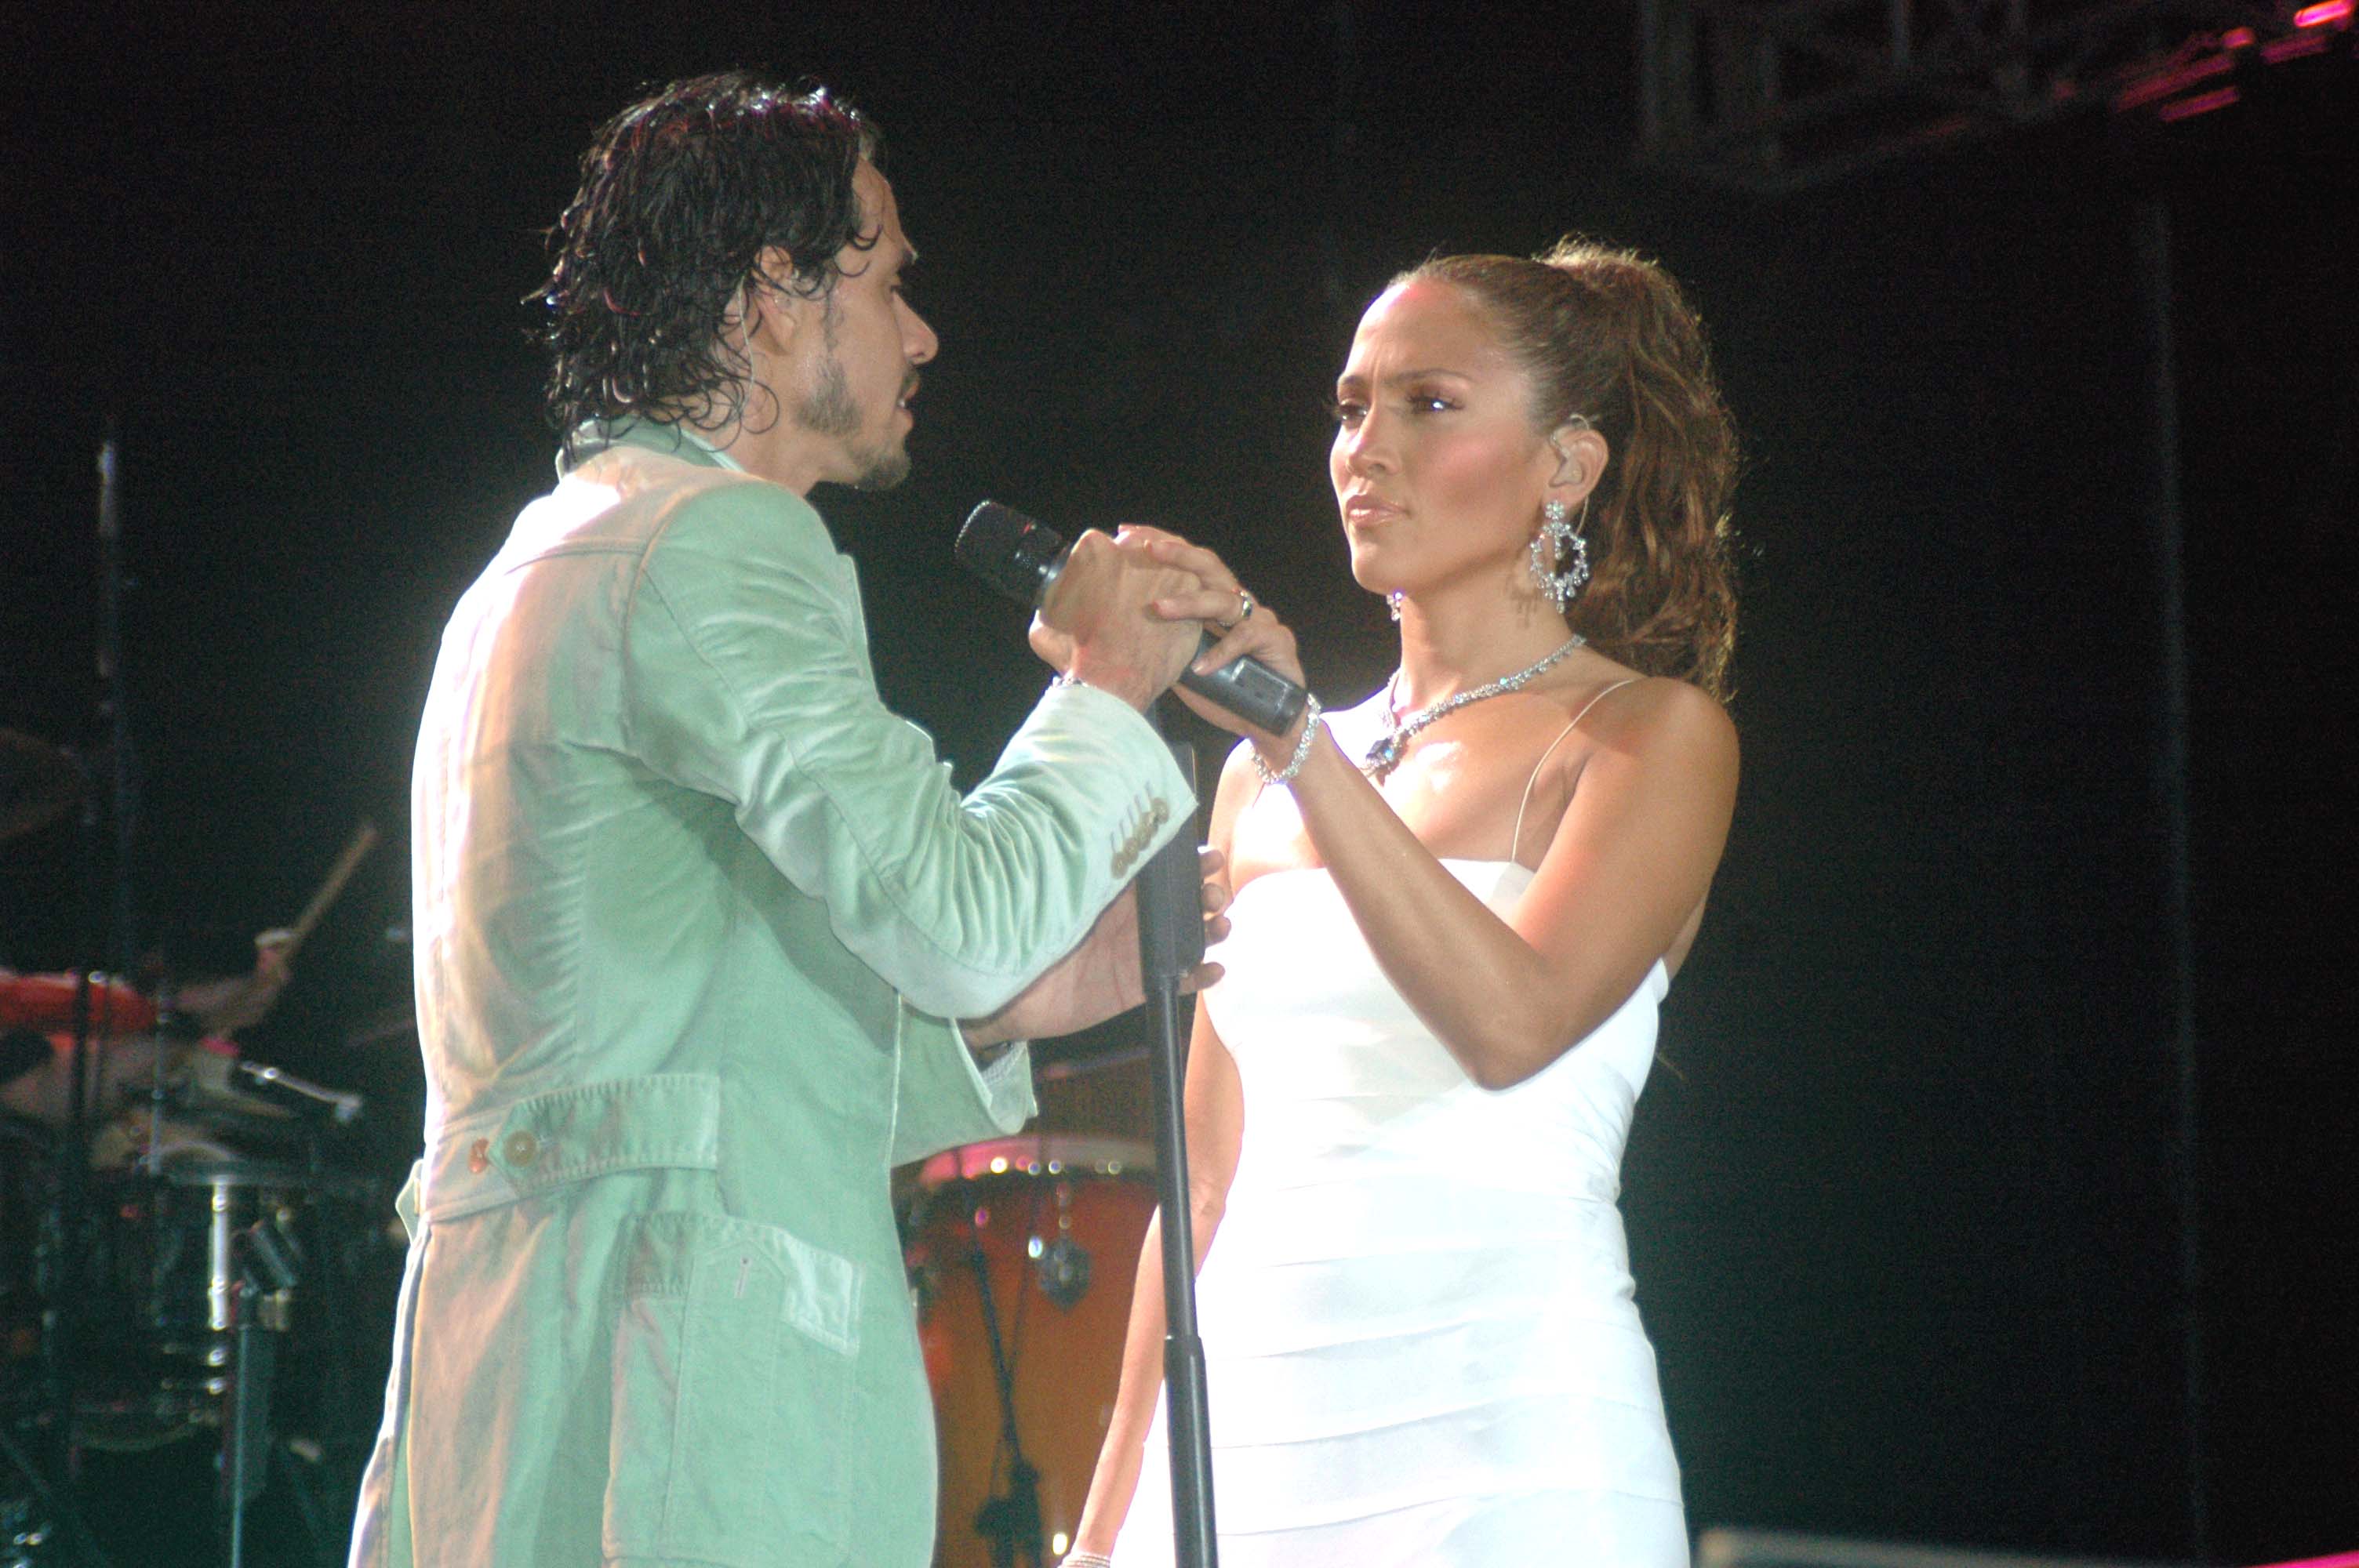 Marc Anthony and Jennifer Lopez perform in Santo Domingo, Dominican Republic in 2005. |  Esteban Bucat/Getty Images